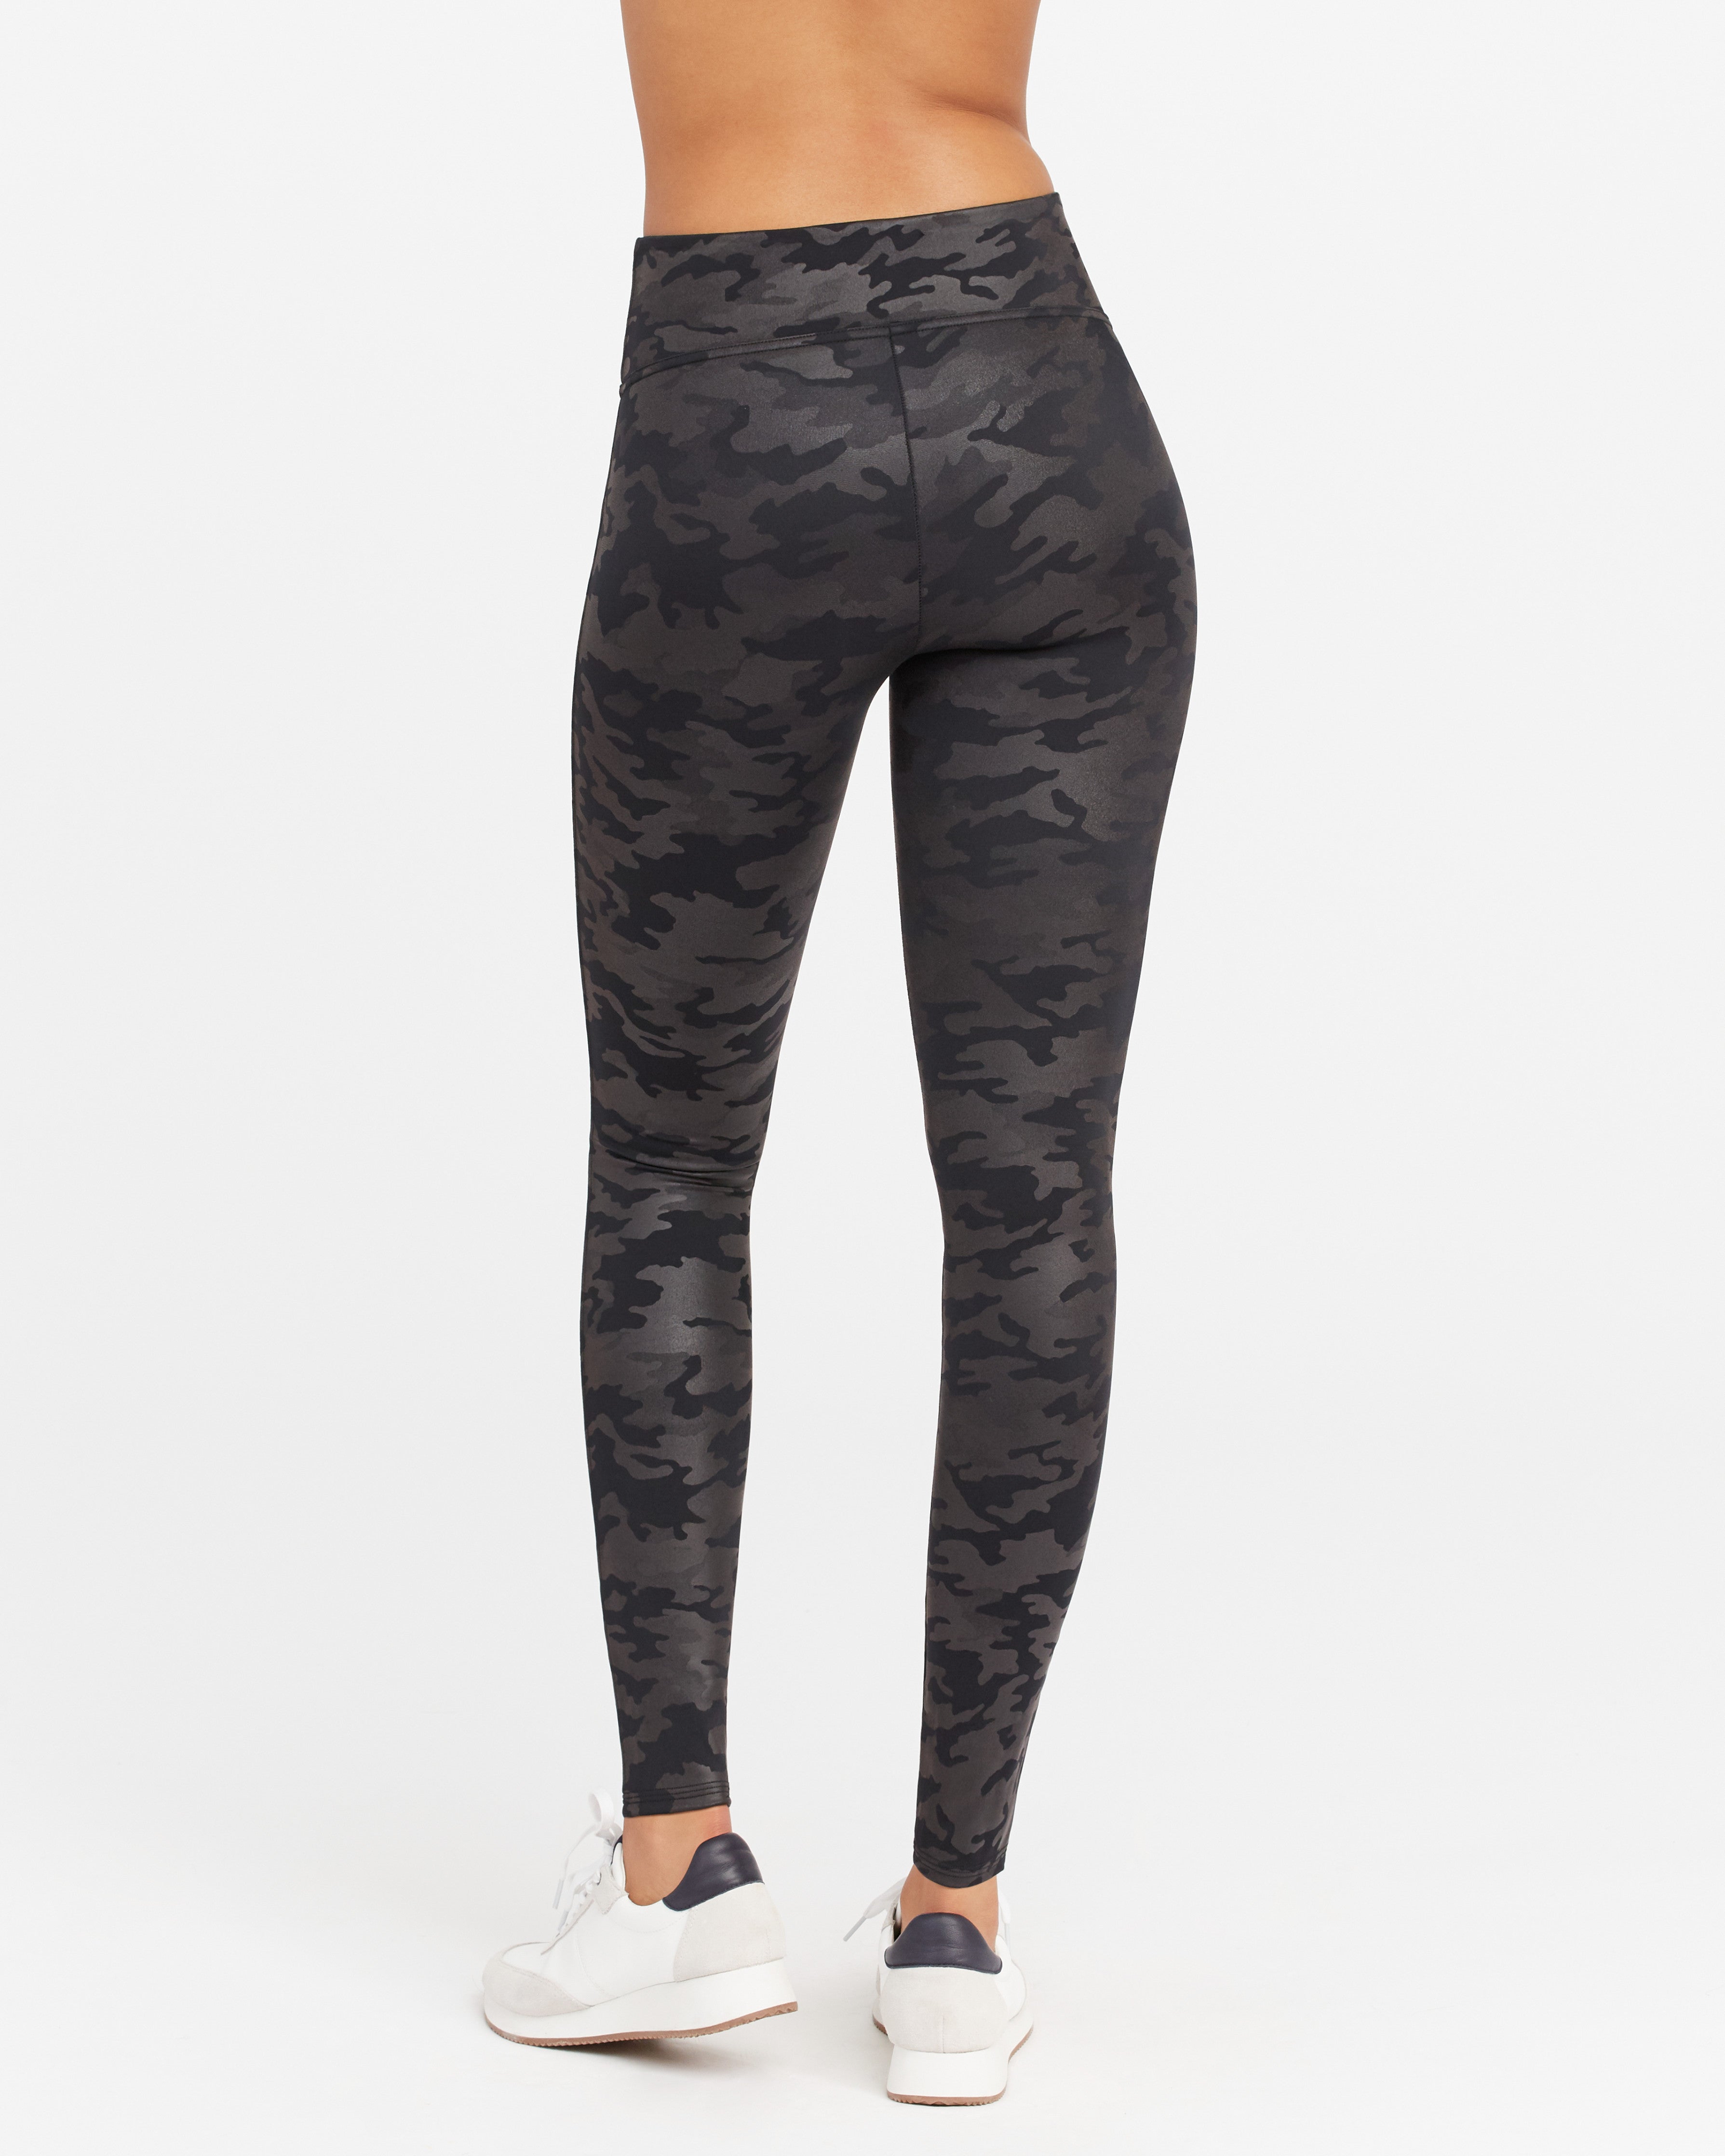 Look At Me Now Seamless Leggings- Green Camo Monkee's Of Raleigh